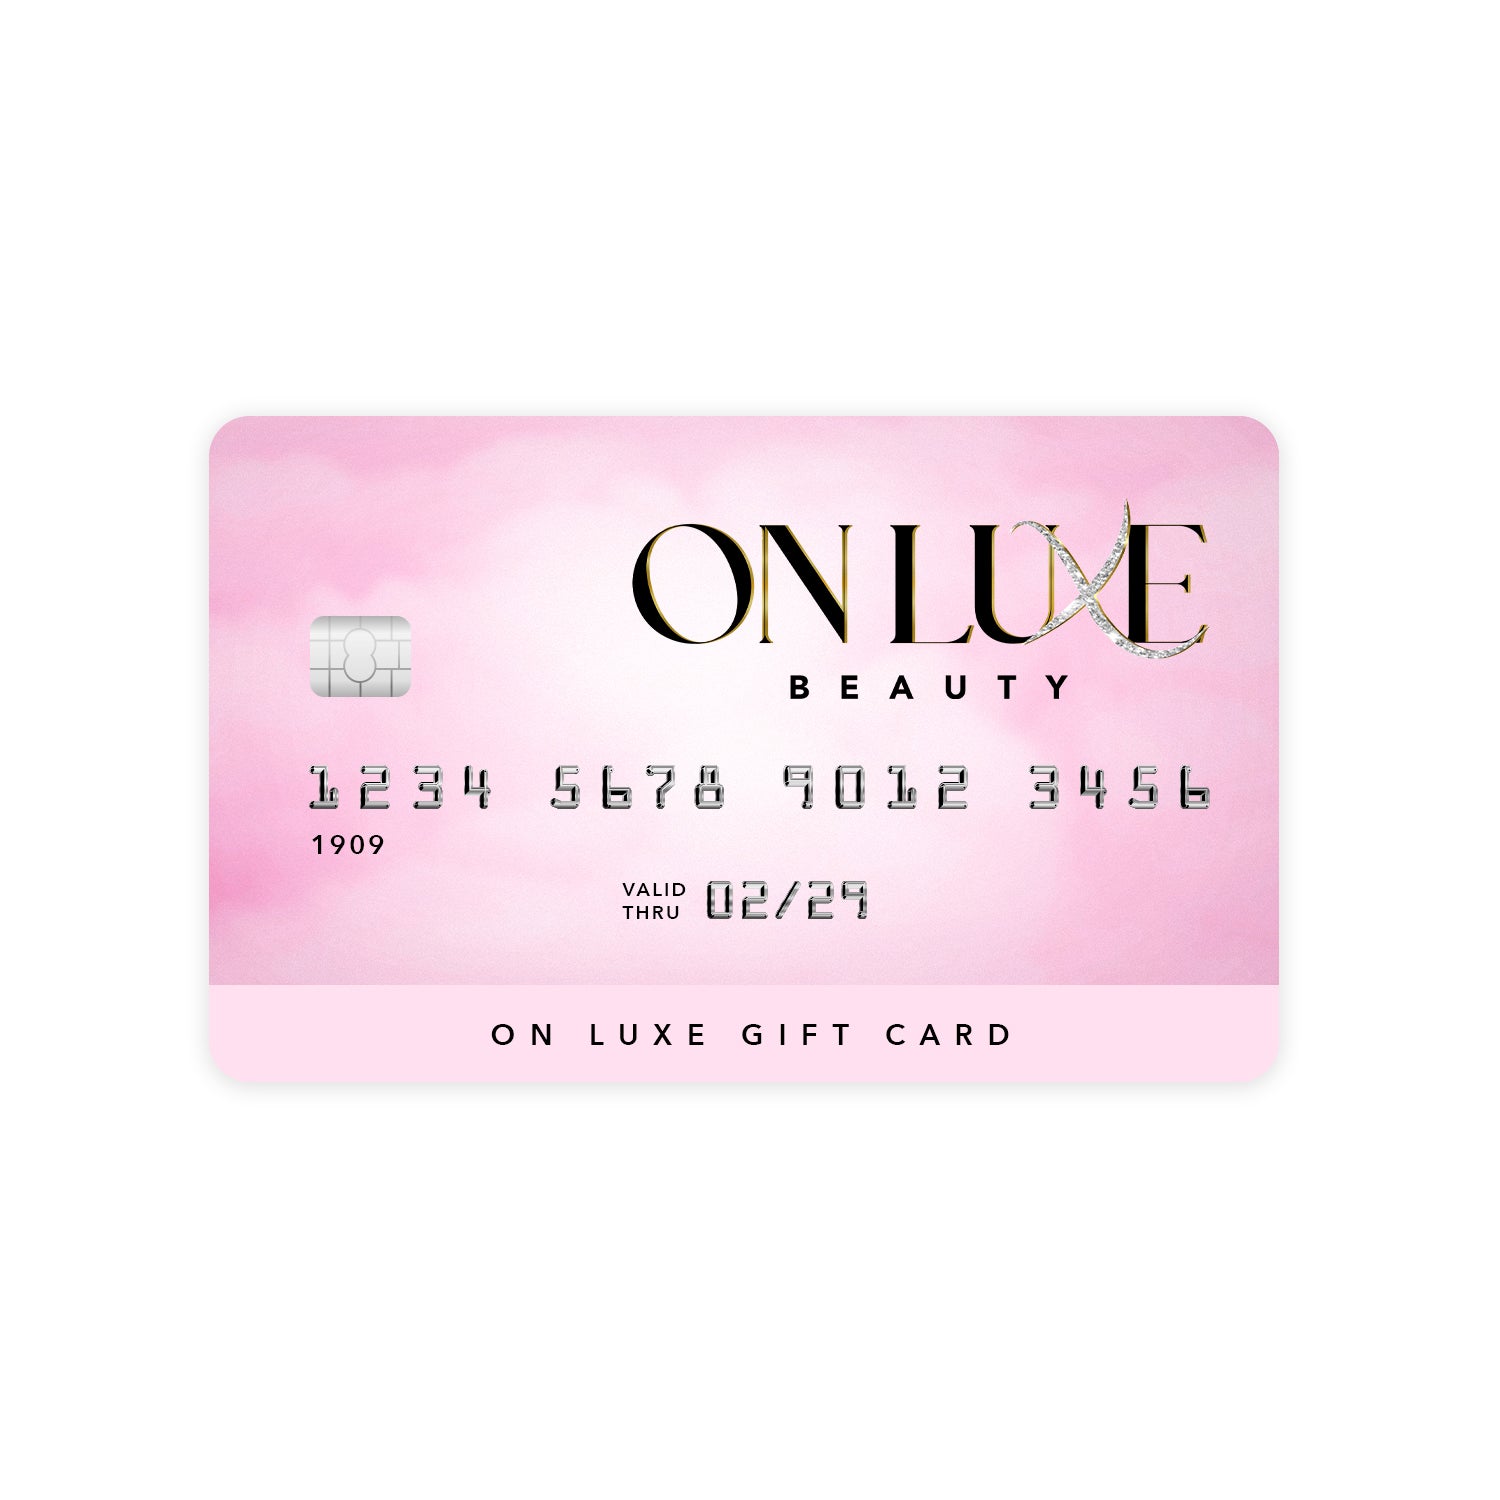 On Luxe Beauty E-Gift Card